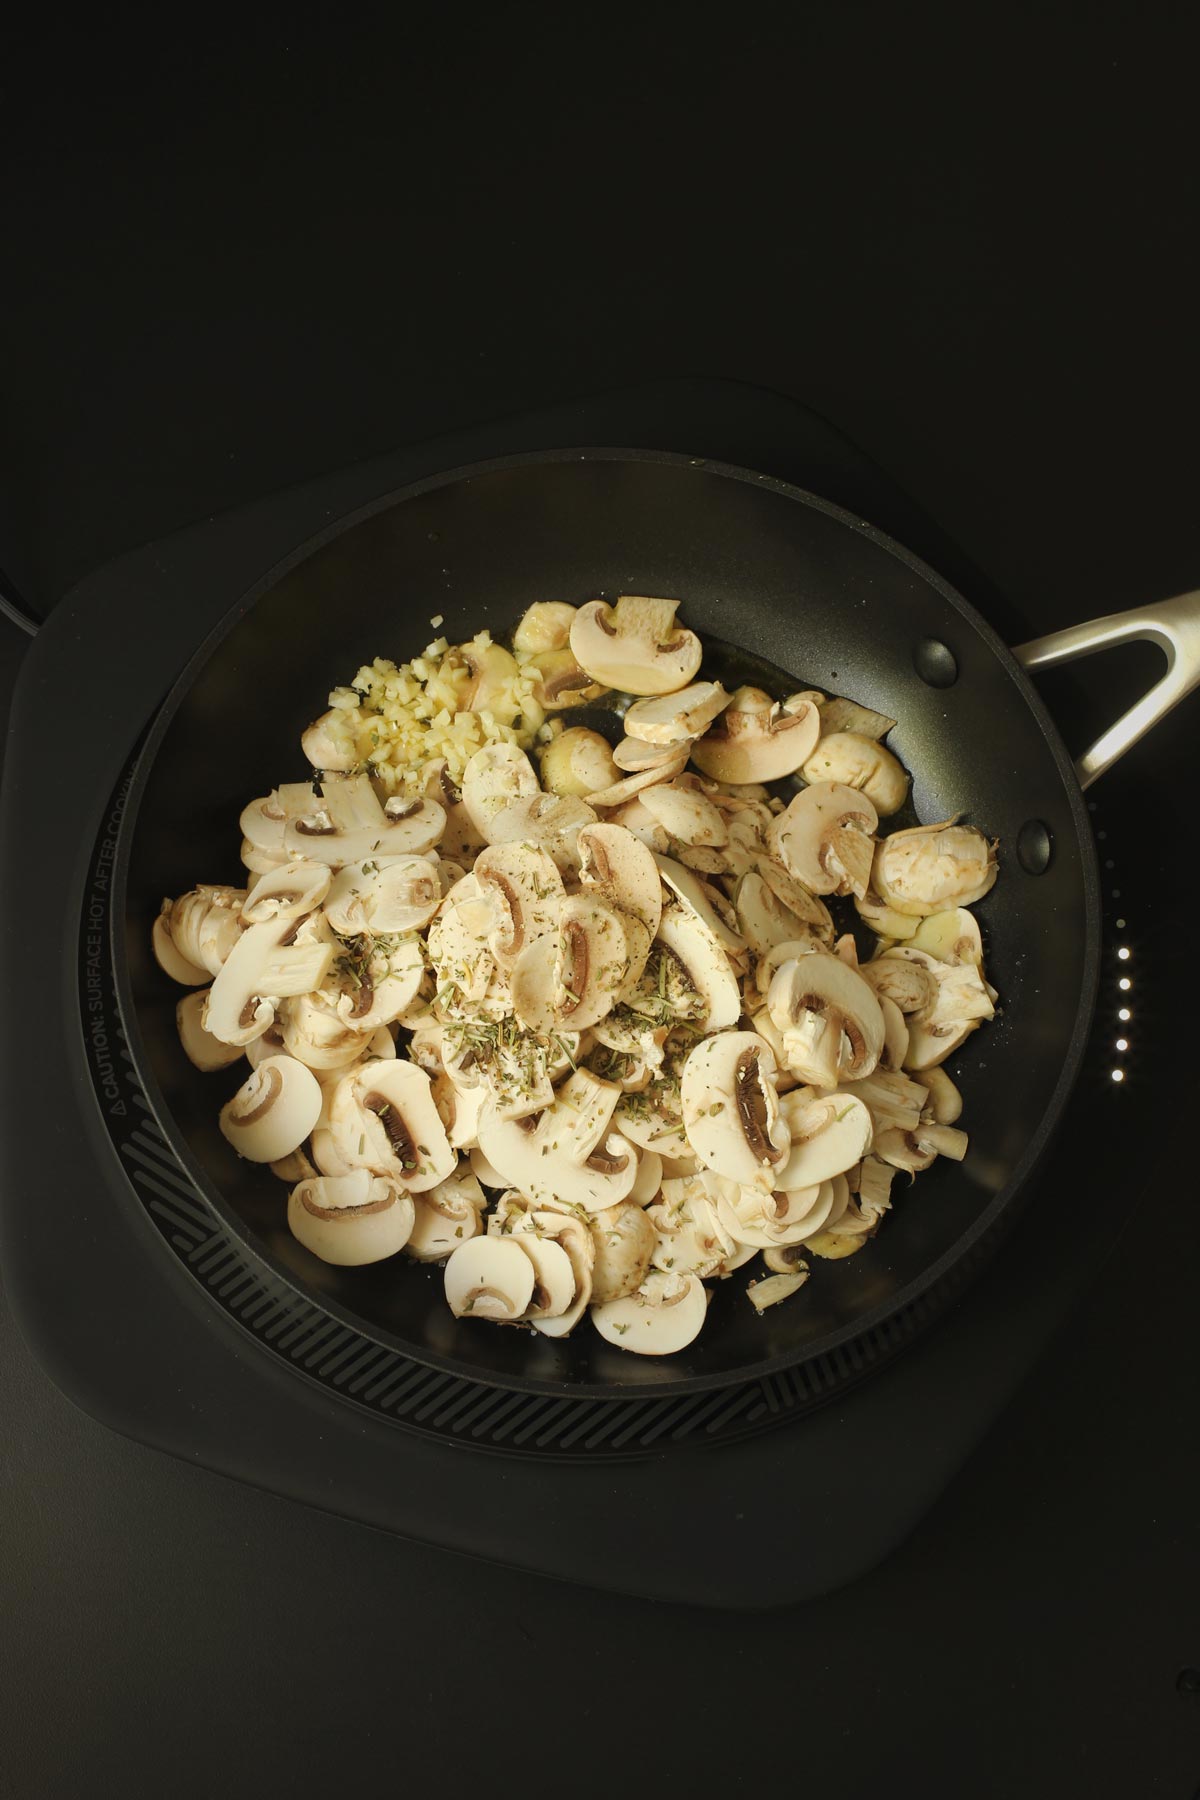 mushrooms and garlic added to the skillet.